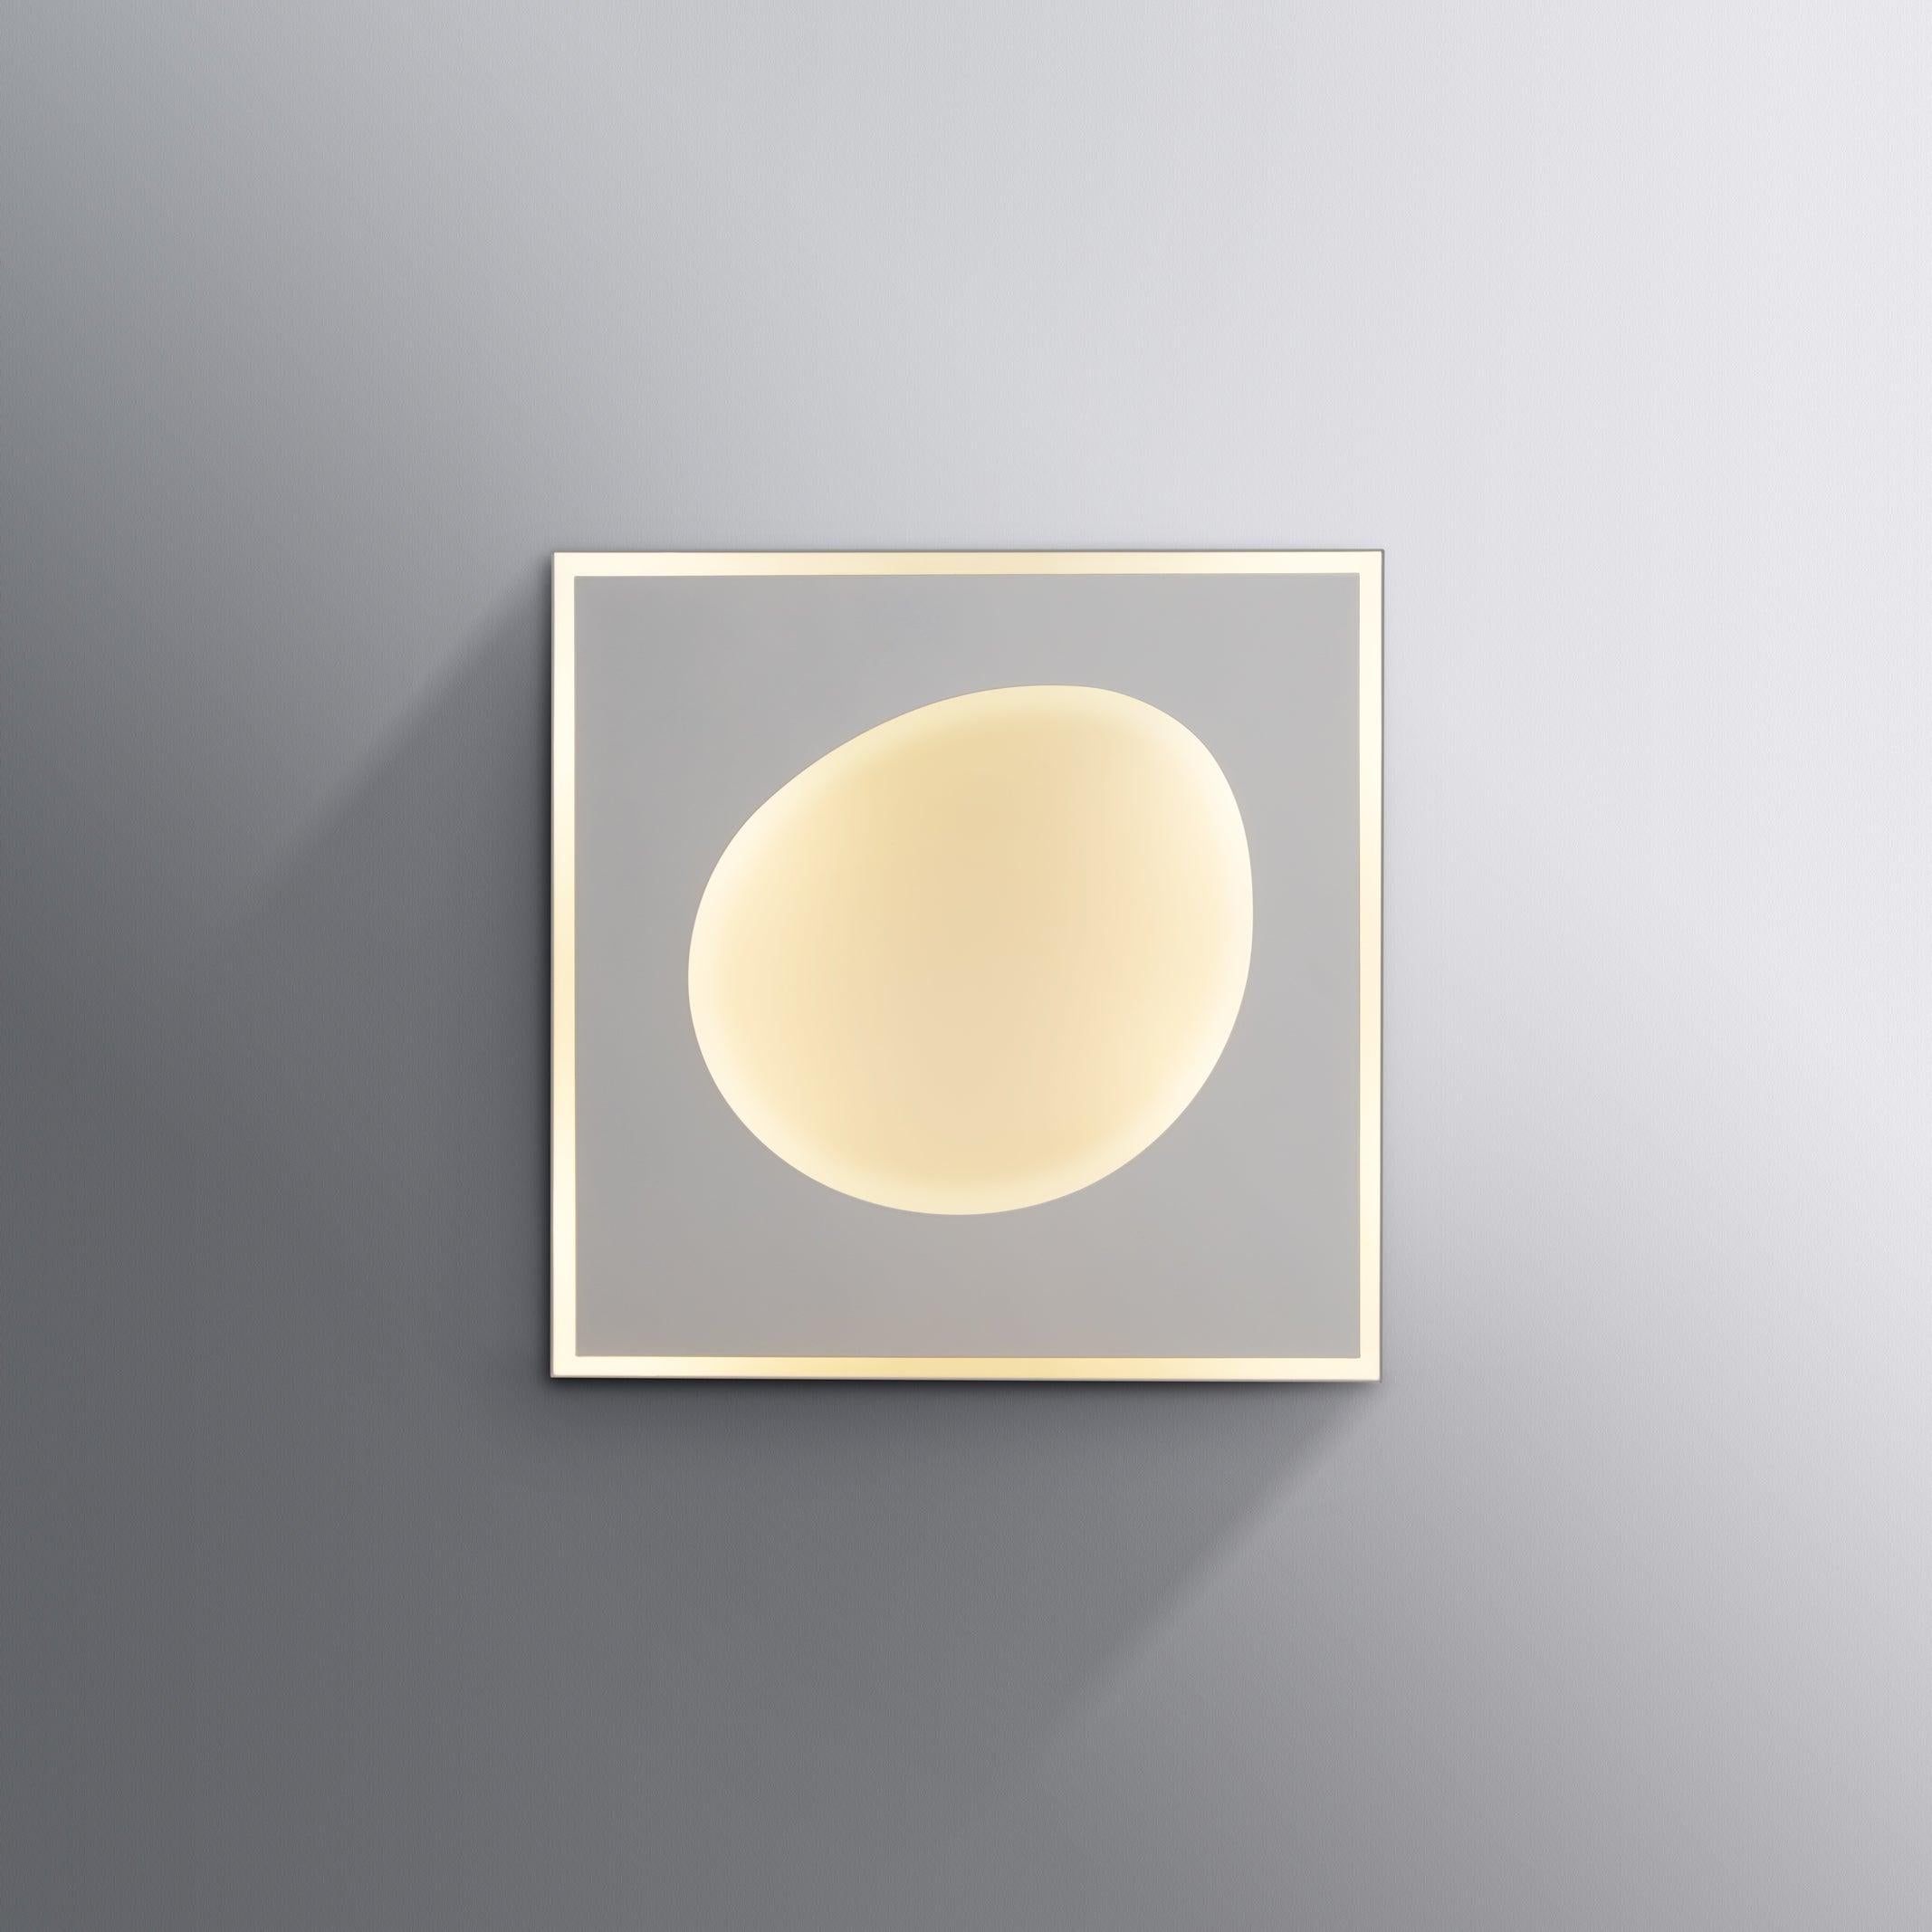 Wall sconce FC01 design by the Argentine architect Florencia Costa Italy limited edition metal varnished white At Pollice Light Gallery: a project that brings together influential contemporary designers, architects and artists in order to create